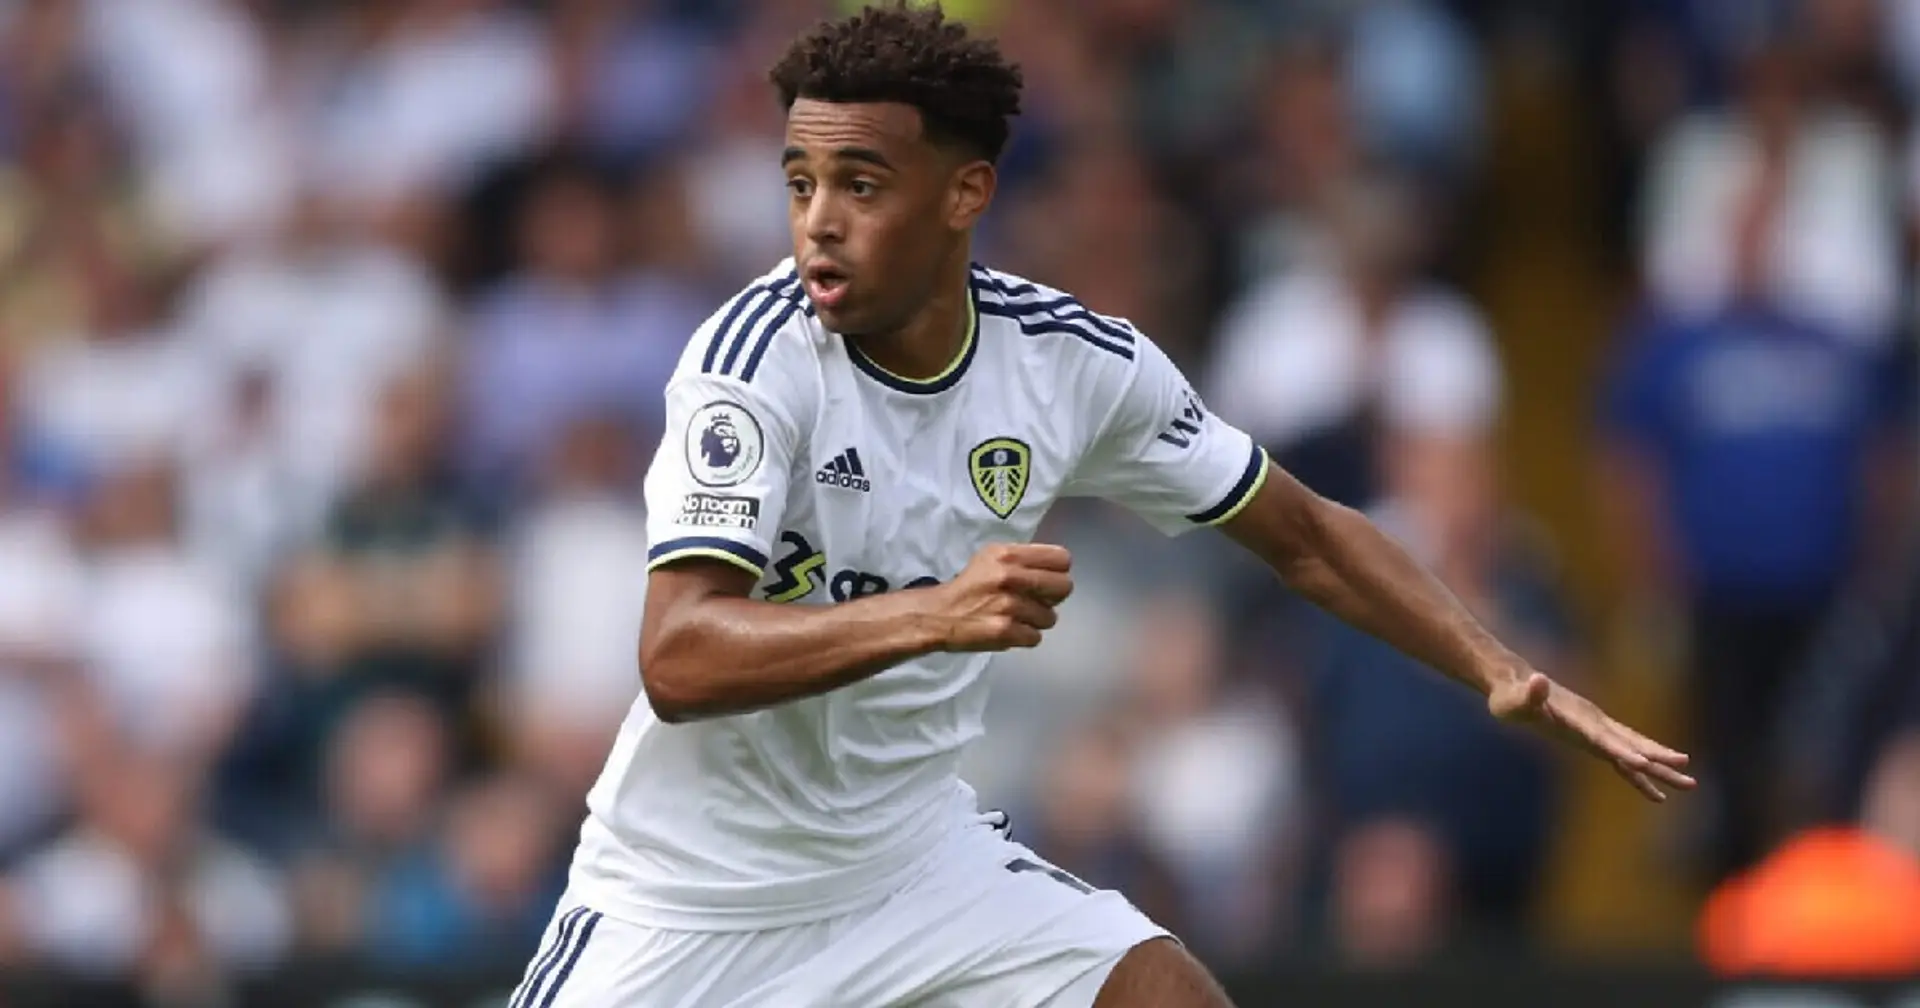 'Here we go!': Romano confirms Tyler Adams transfer to Chelsea